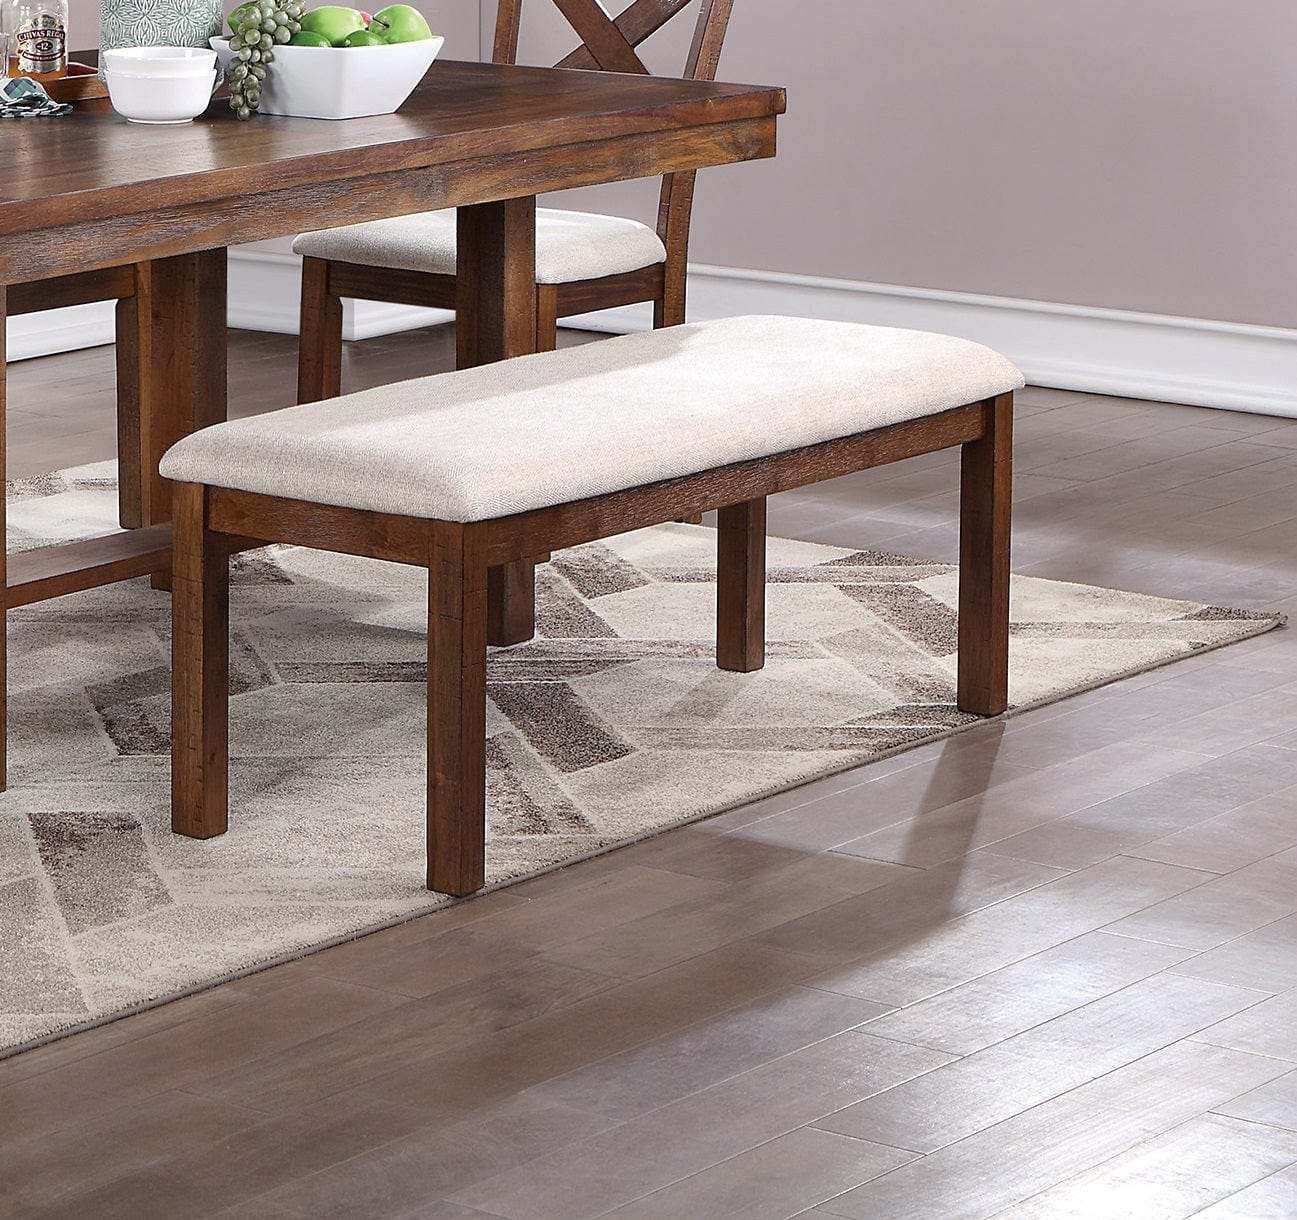 1st Choice Furniture Direct 6pc Dining Table 1st Choice Modern 6-Piece Wooden Dining Table in Natural Brown Finish